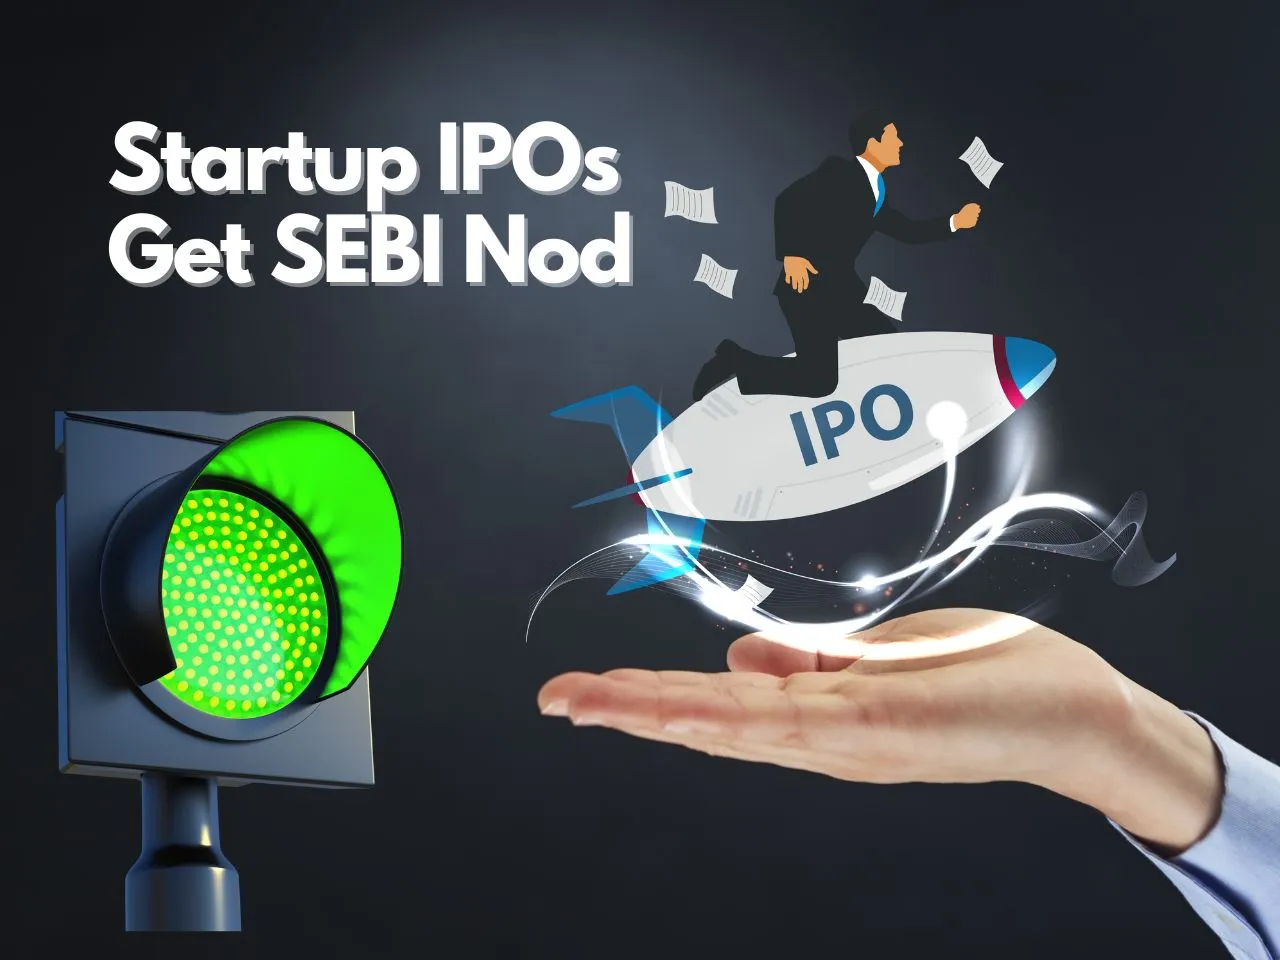 Startups TBO Tek, Awfis IPOs Approved by SEBI for Fundraising